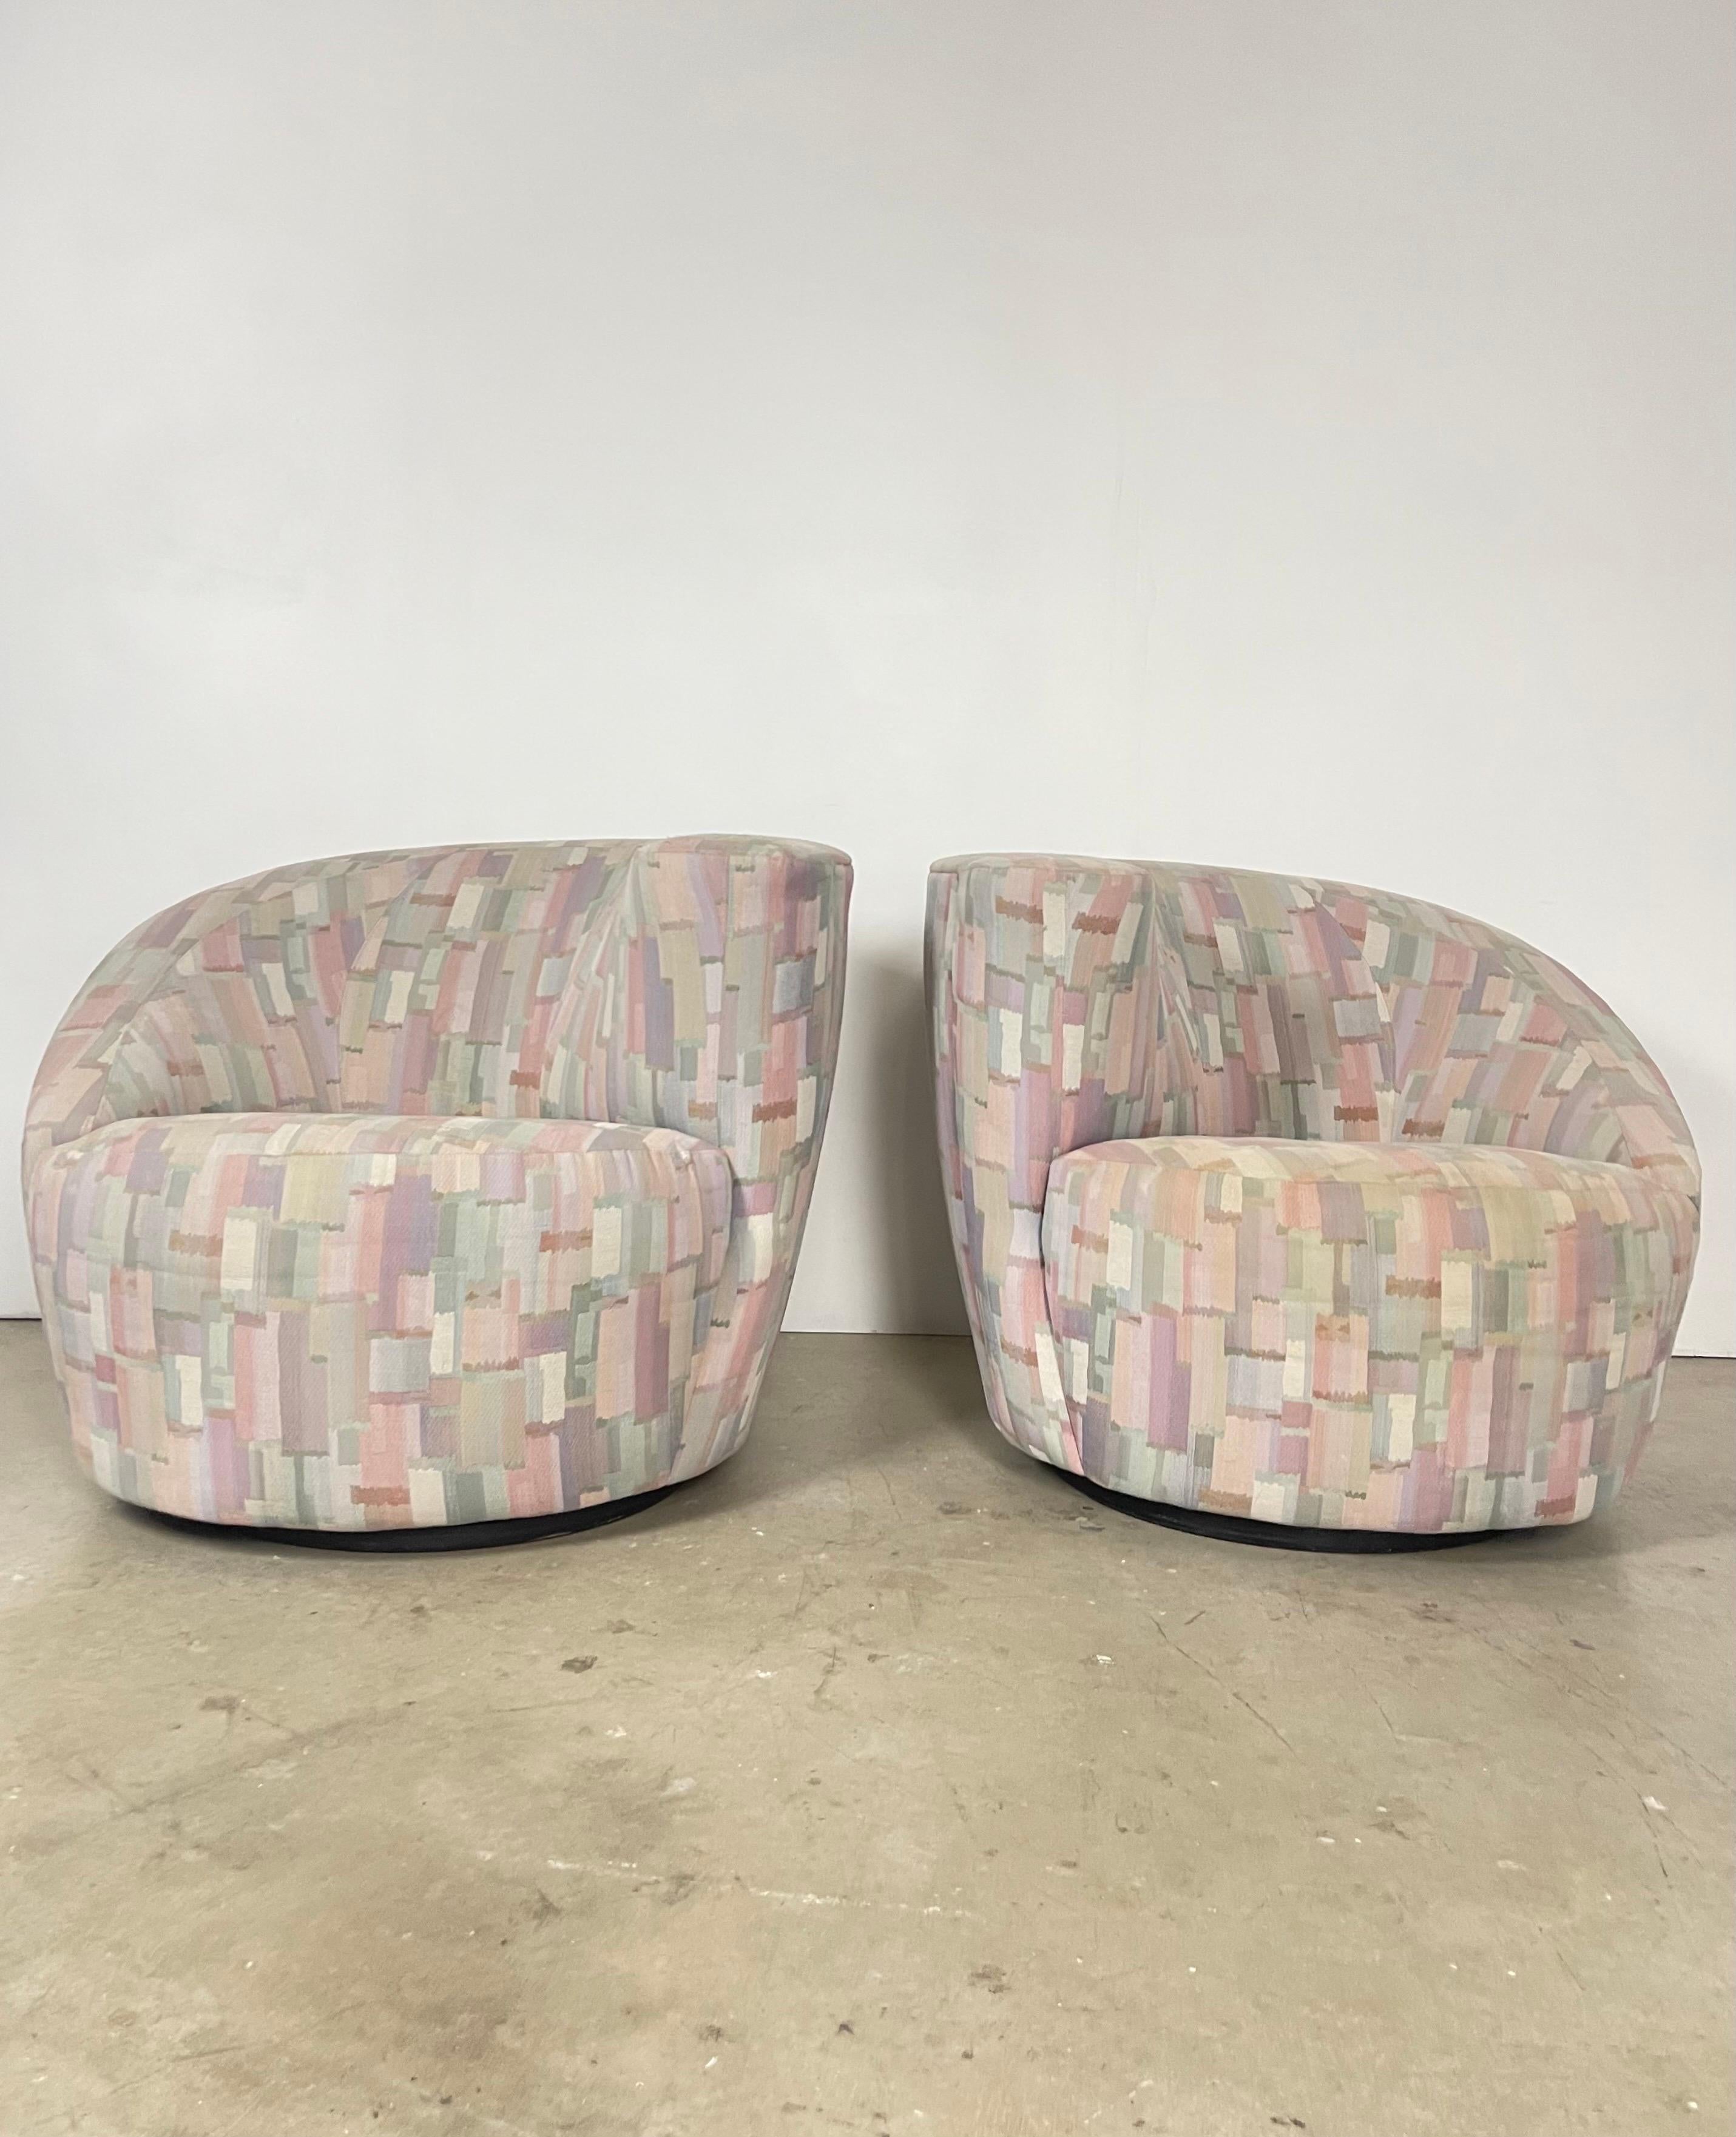 Pair of Vladimir Kagan Nautilus Chairs with Original Pastel Fabric, Light Wear

Description:
Up for sale is a pair of Nautilus chairs attributed to Vladimir Kagan, one of his most iconic designs. These chairs feature a unique curved shell shape